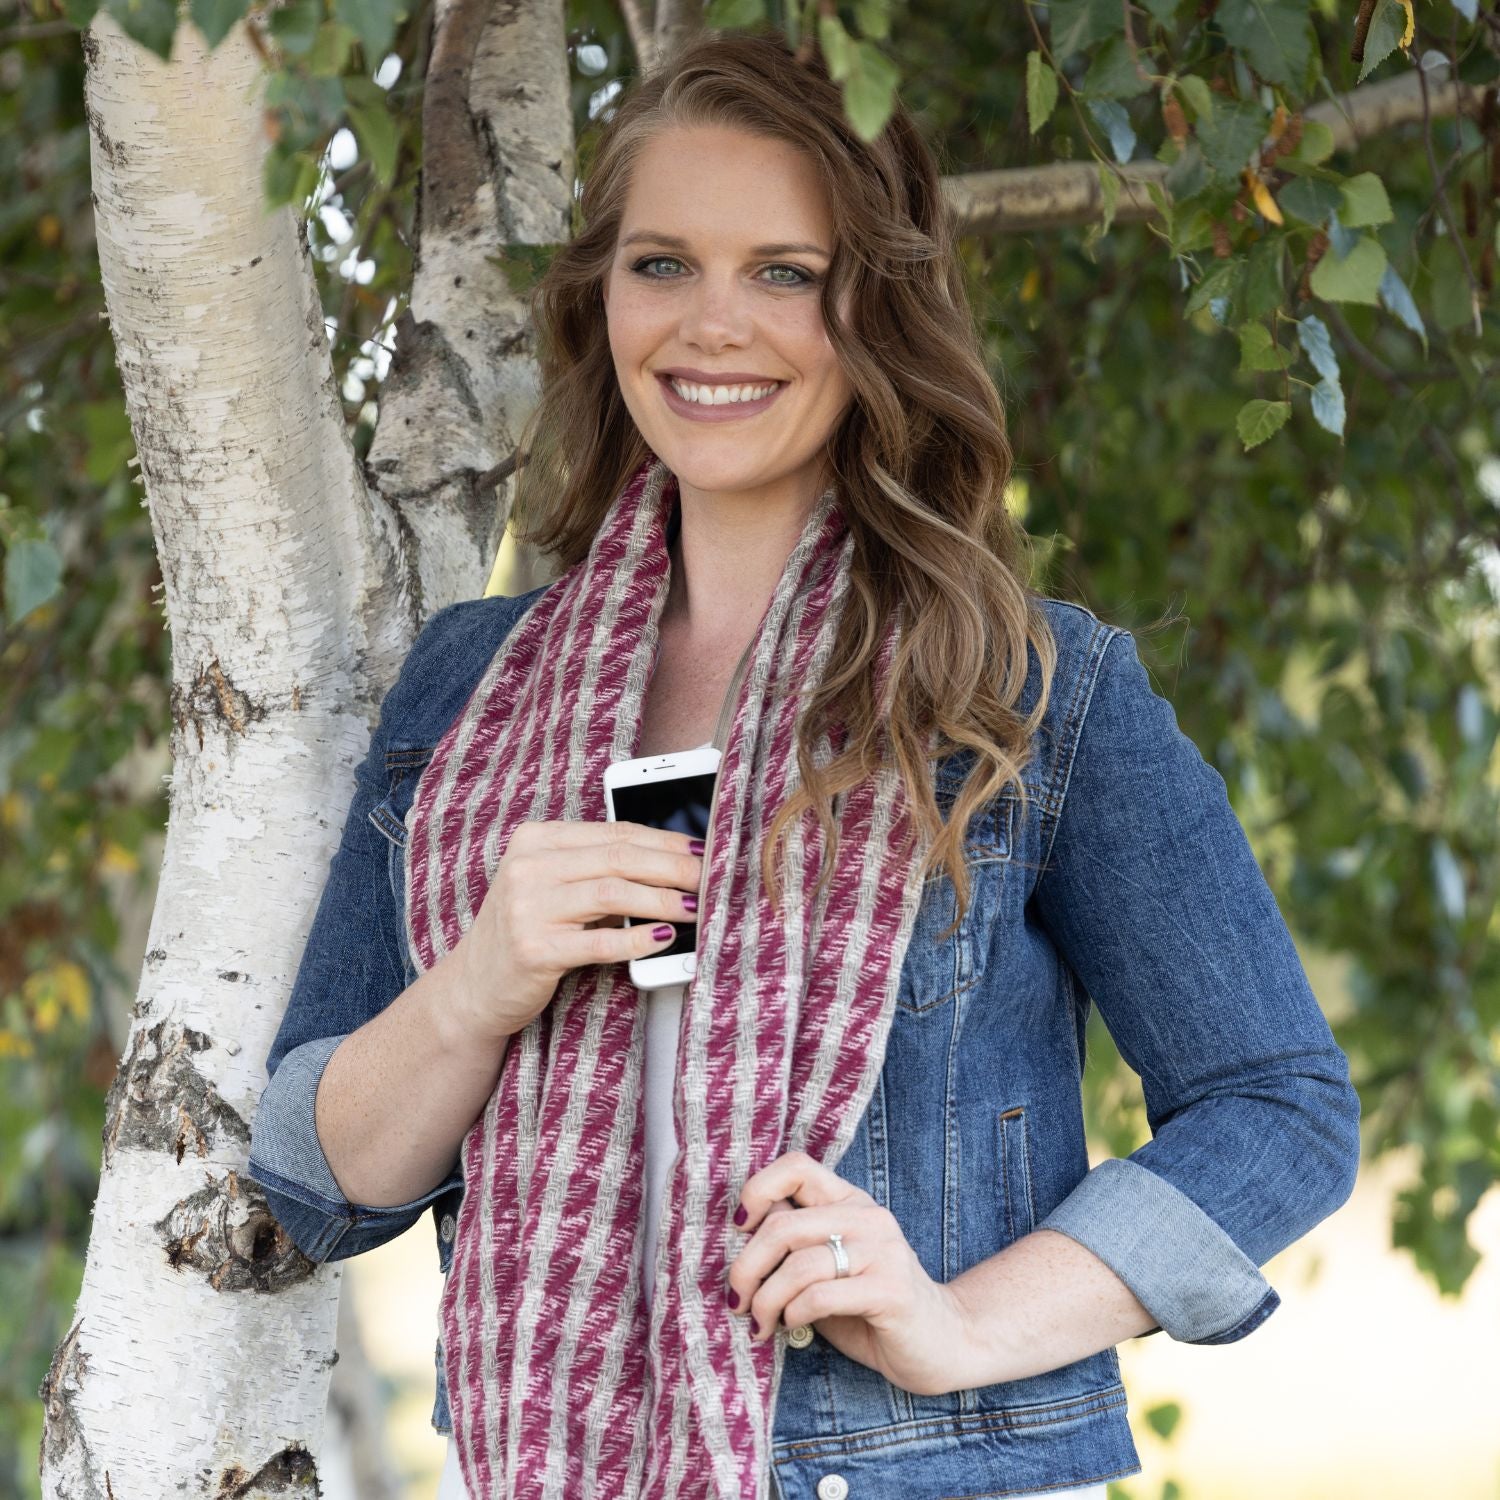 SHOLDIT Convertible Infinity Scarf with Pocket Edenburgh Burgundy long with phone in pocket